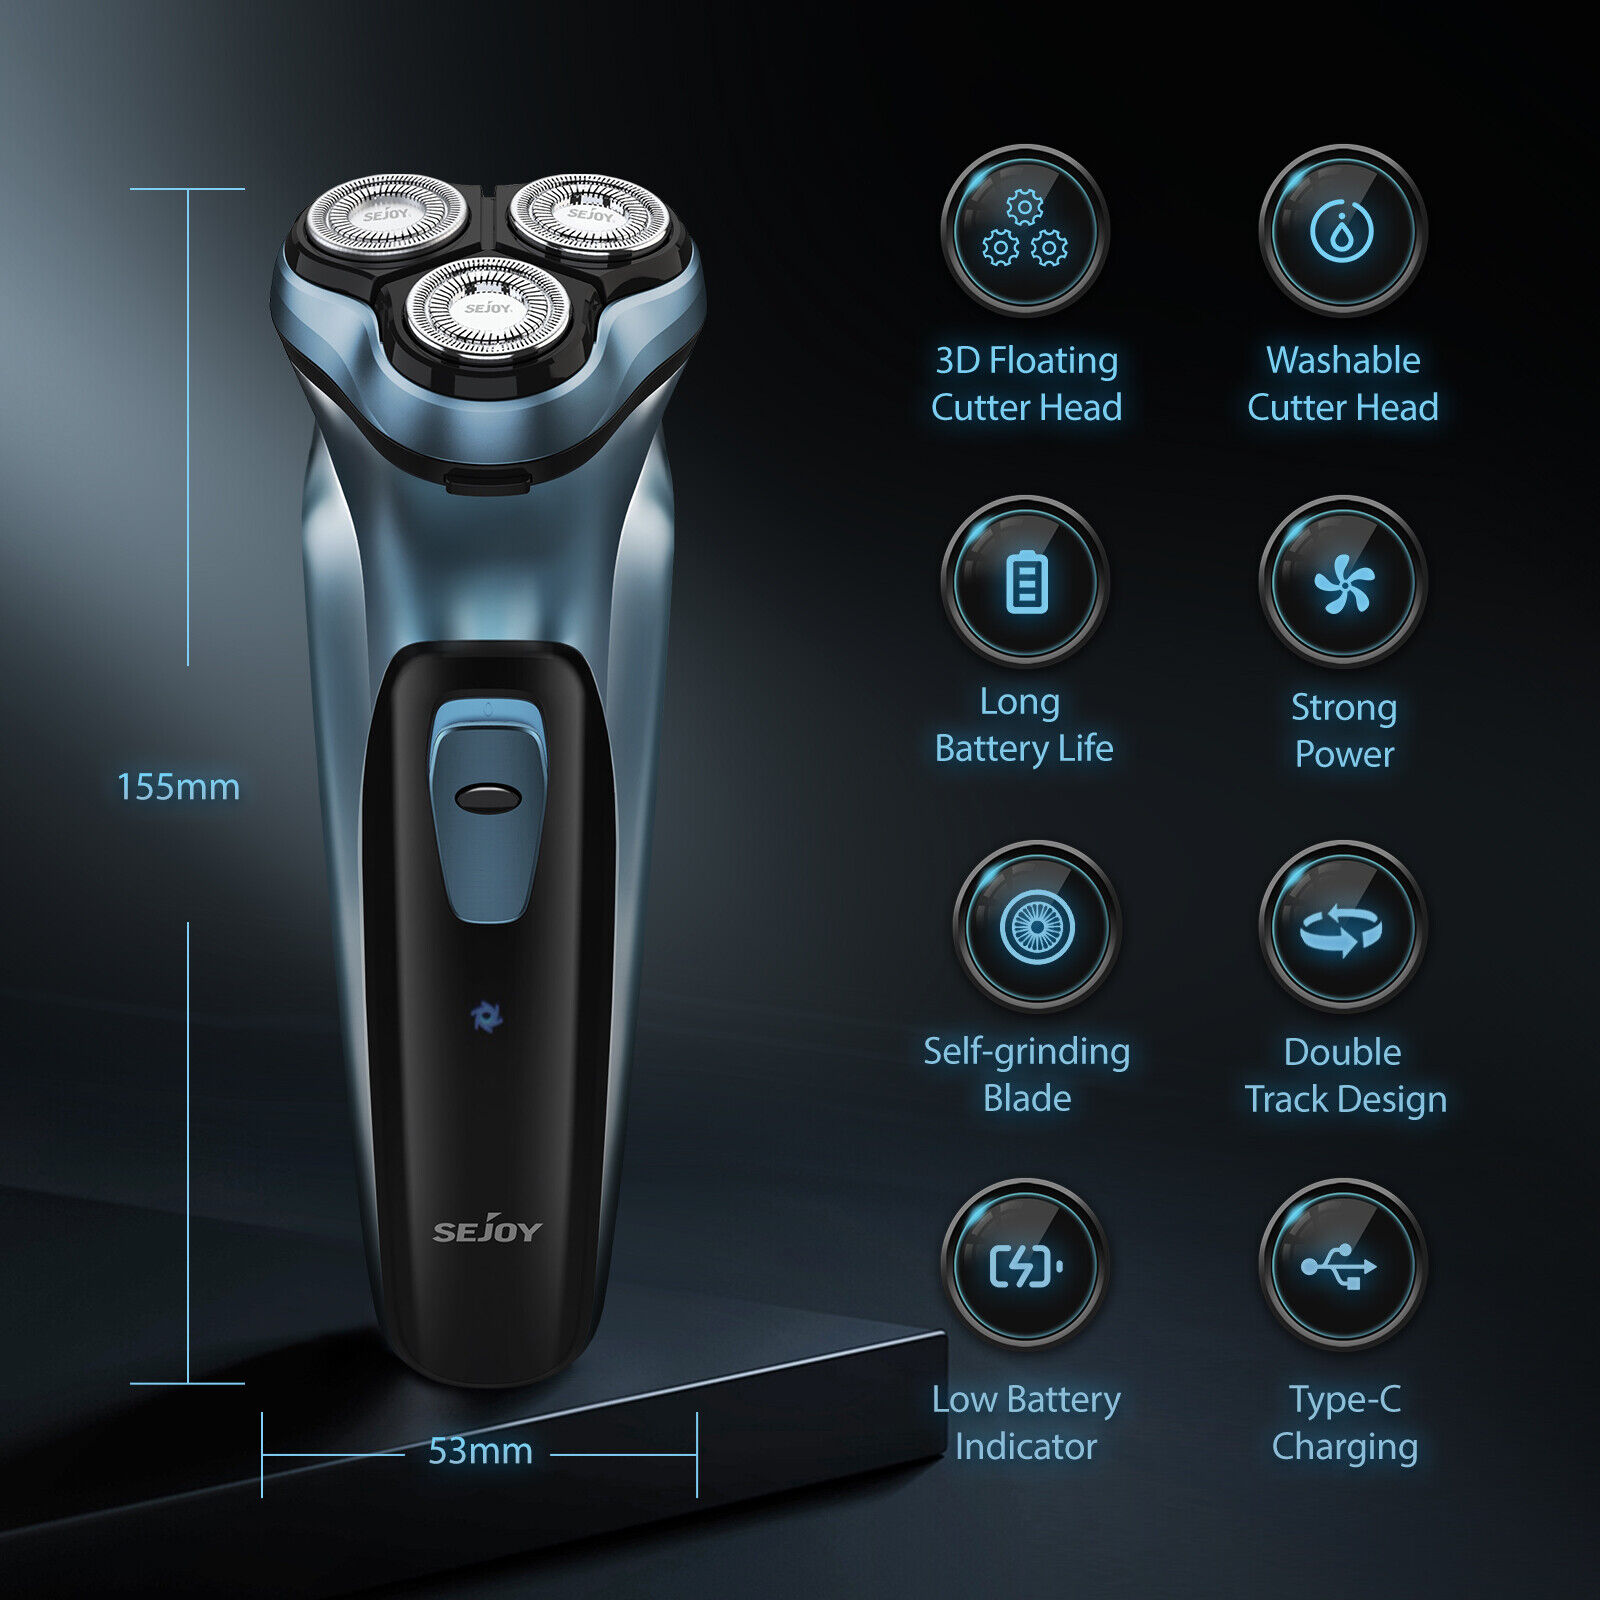 SEJOY Electric Rotary Shaver with Trimmer